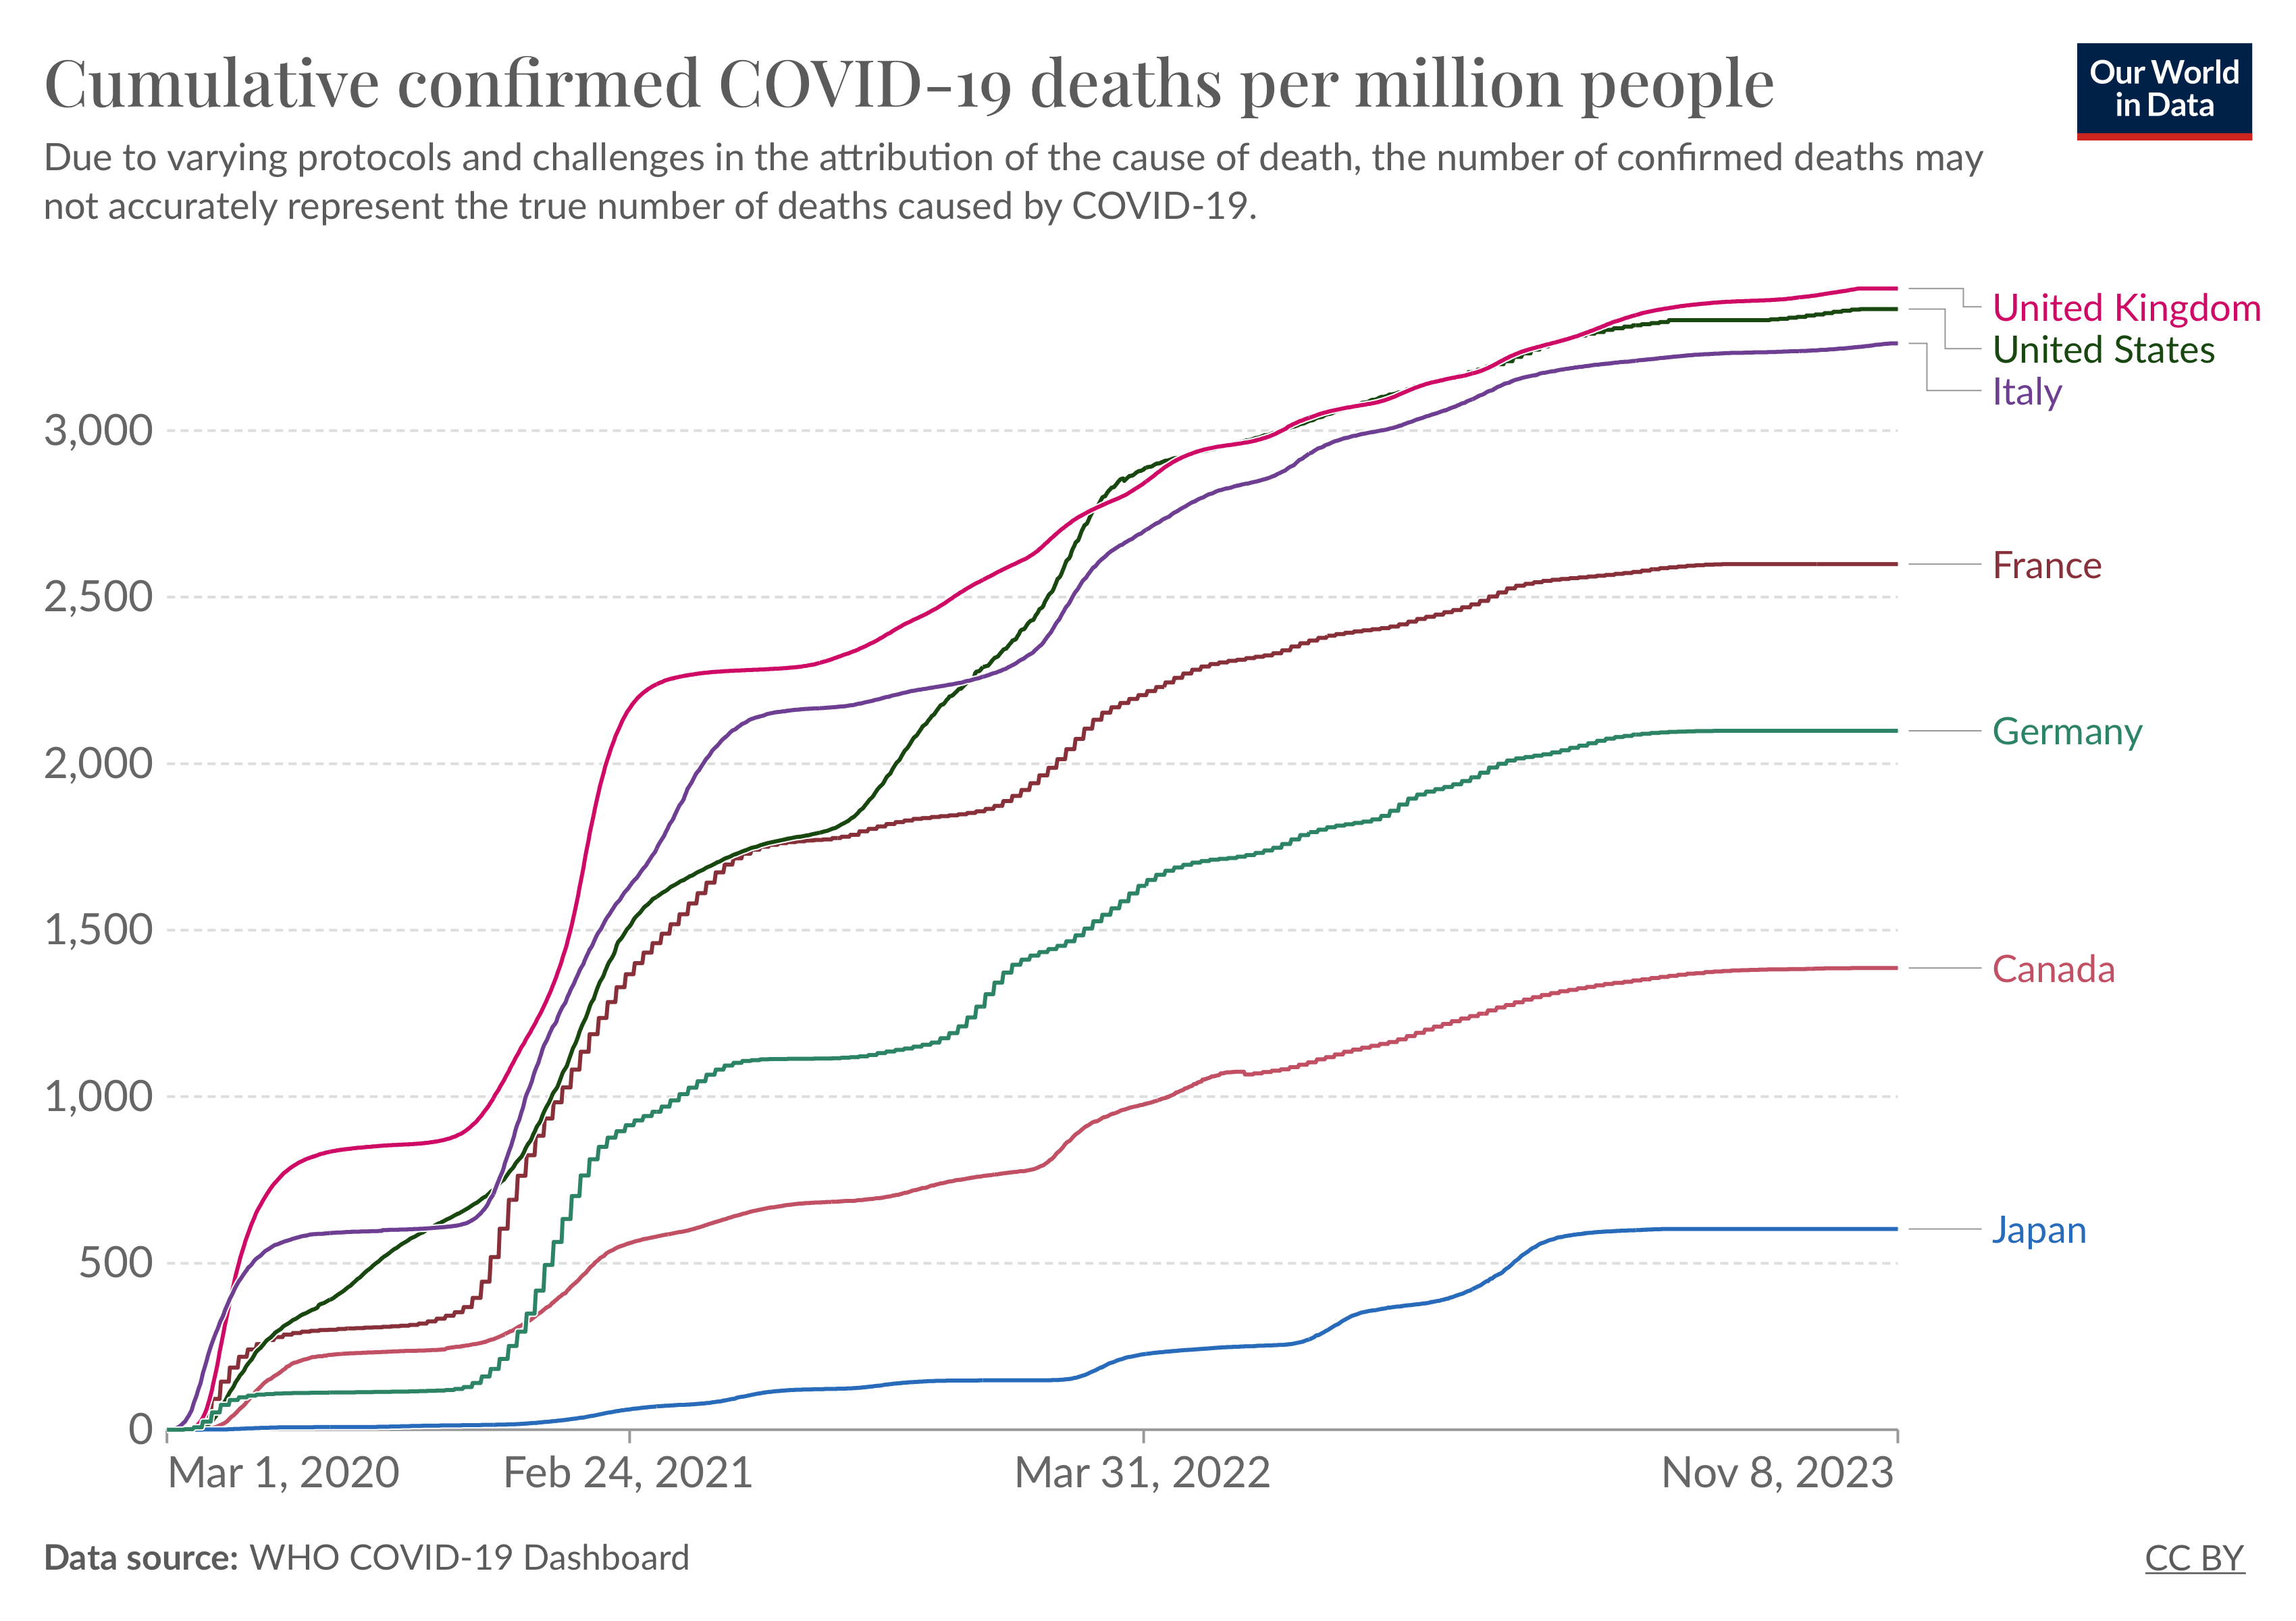 Our world in data chart showing cumulative COVID-19 deaths per capita of G7 countries. Japan had over 5-fold fewer deaths per capita from COVID-19 than the US.